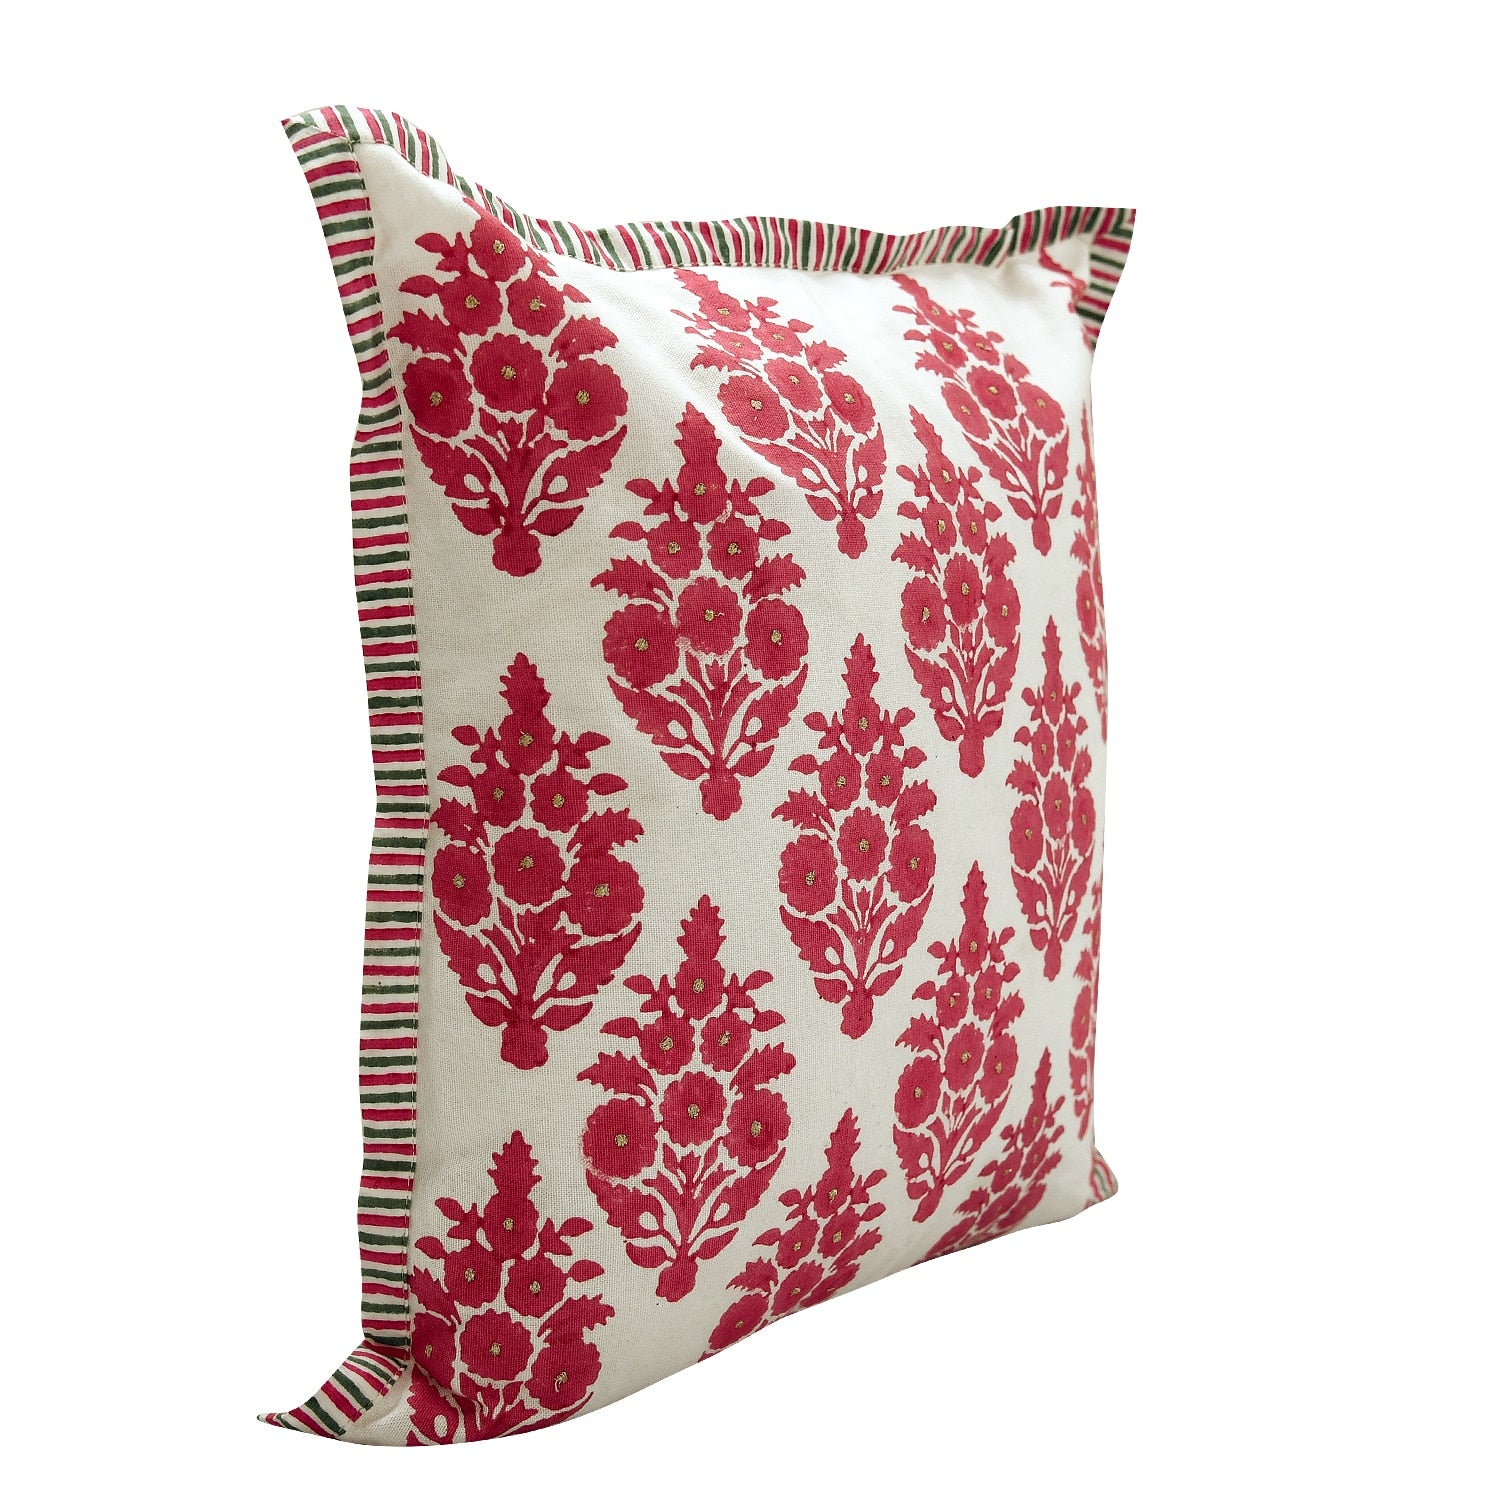 Butah Jaal Hand Block Print Cushion Cover 16"x16" Pink Floral Printed Pattern Cushion Case…